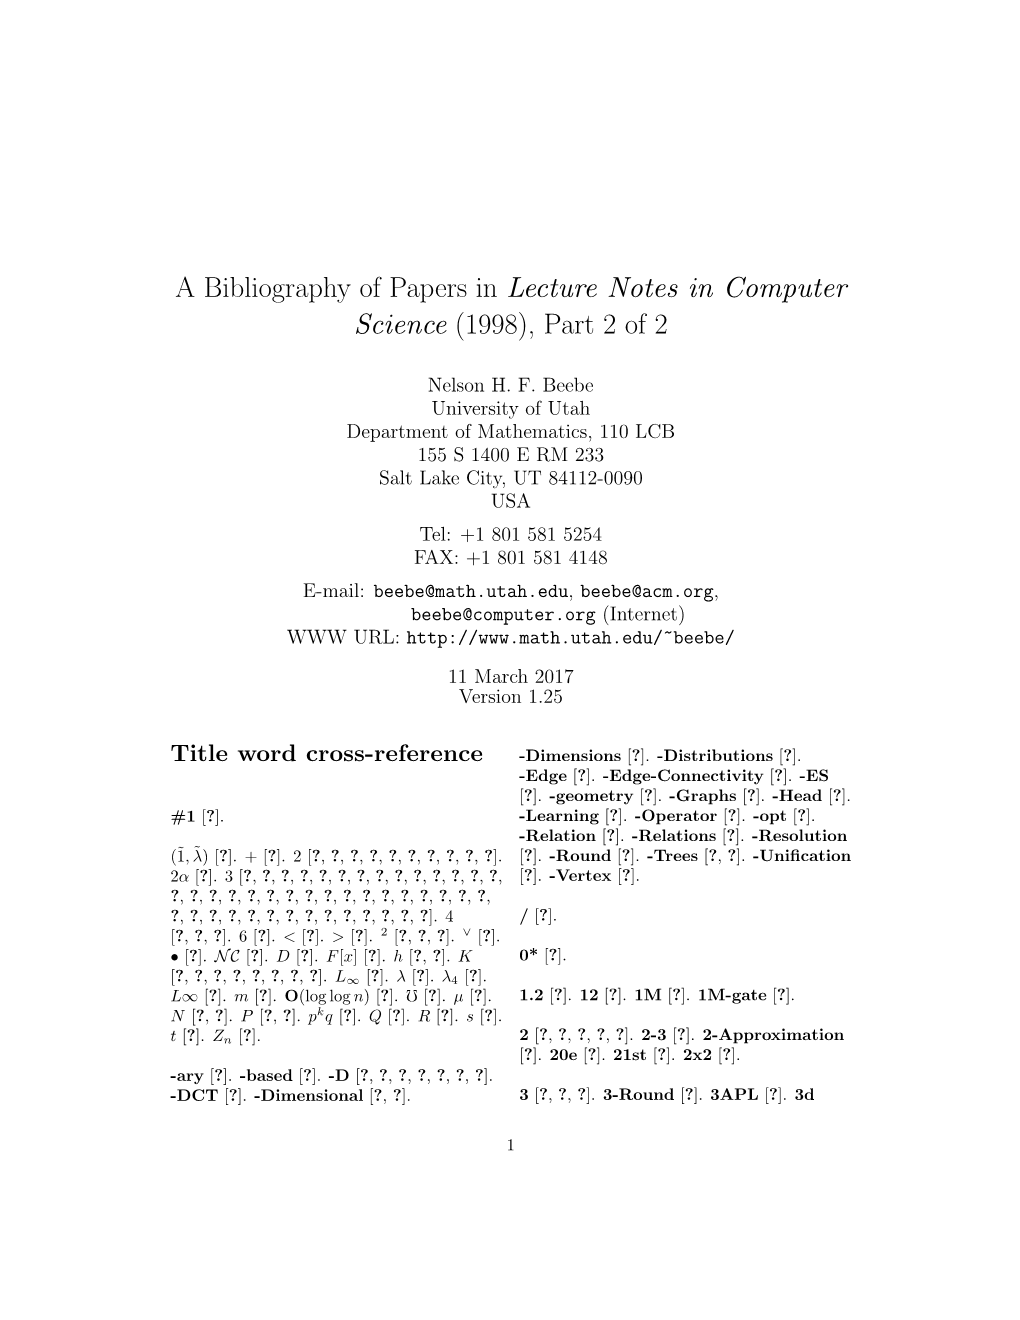 A Bibliography of Papers in Lecture Notes in Computer Science (1998), Part 2 of 2